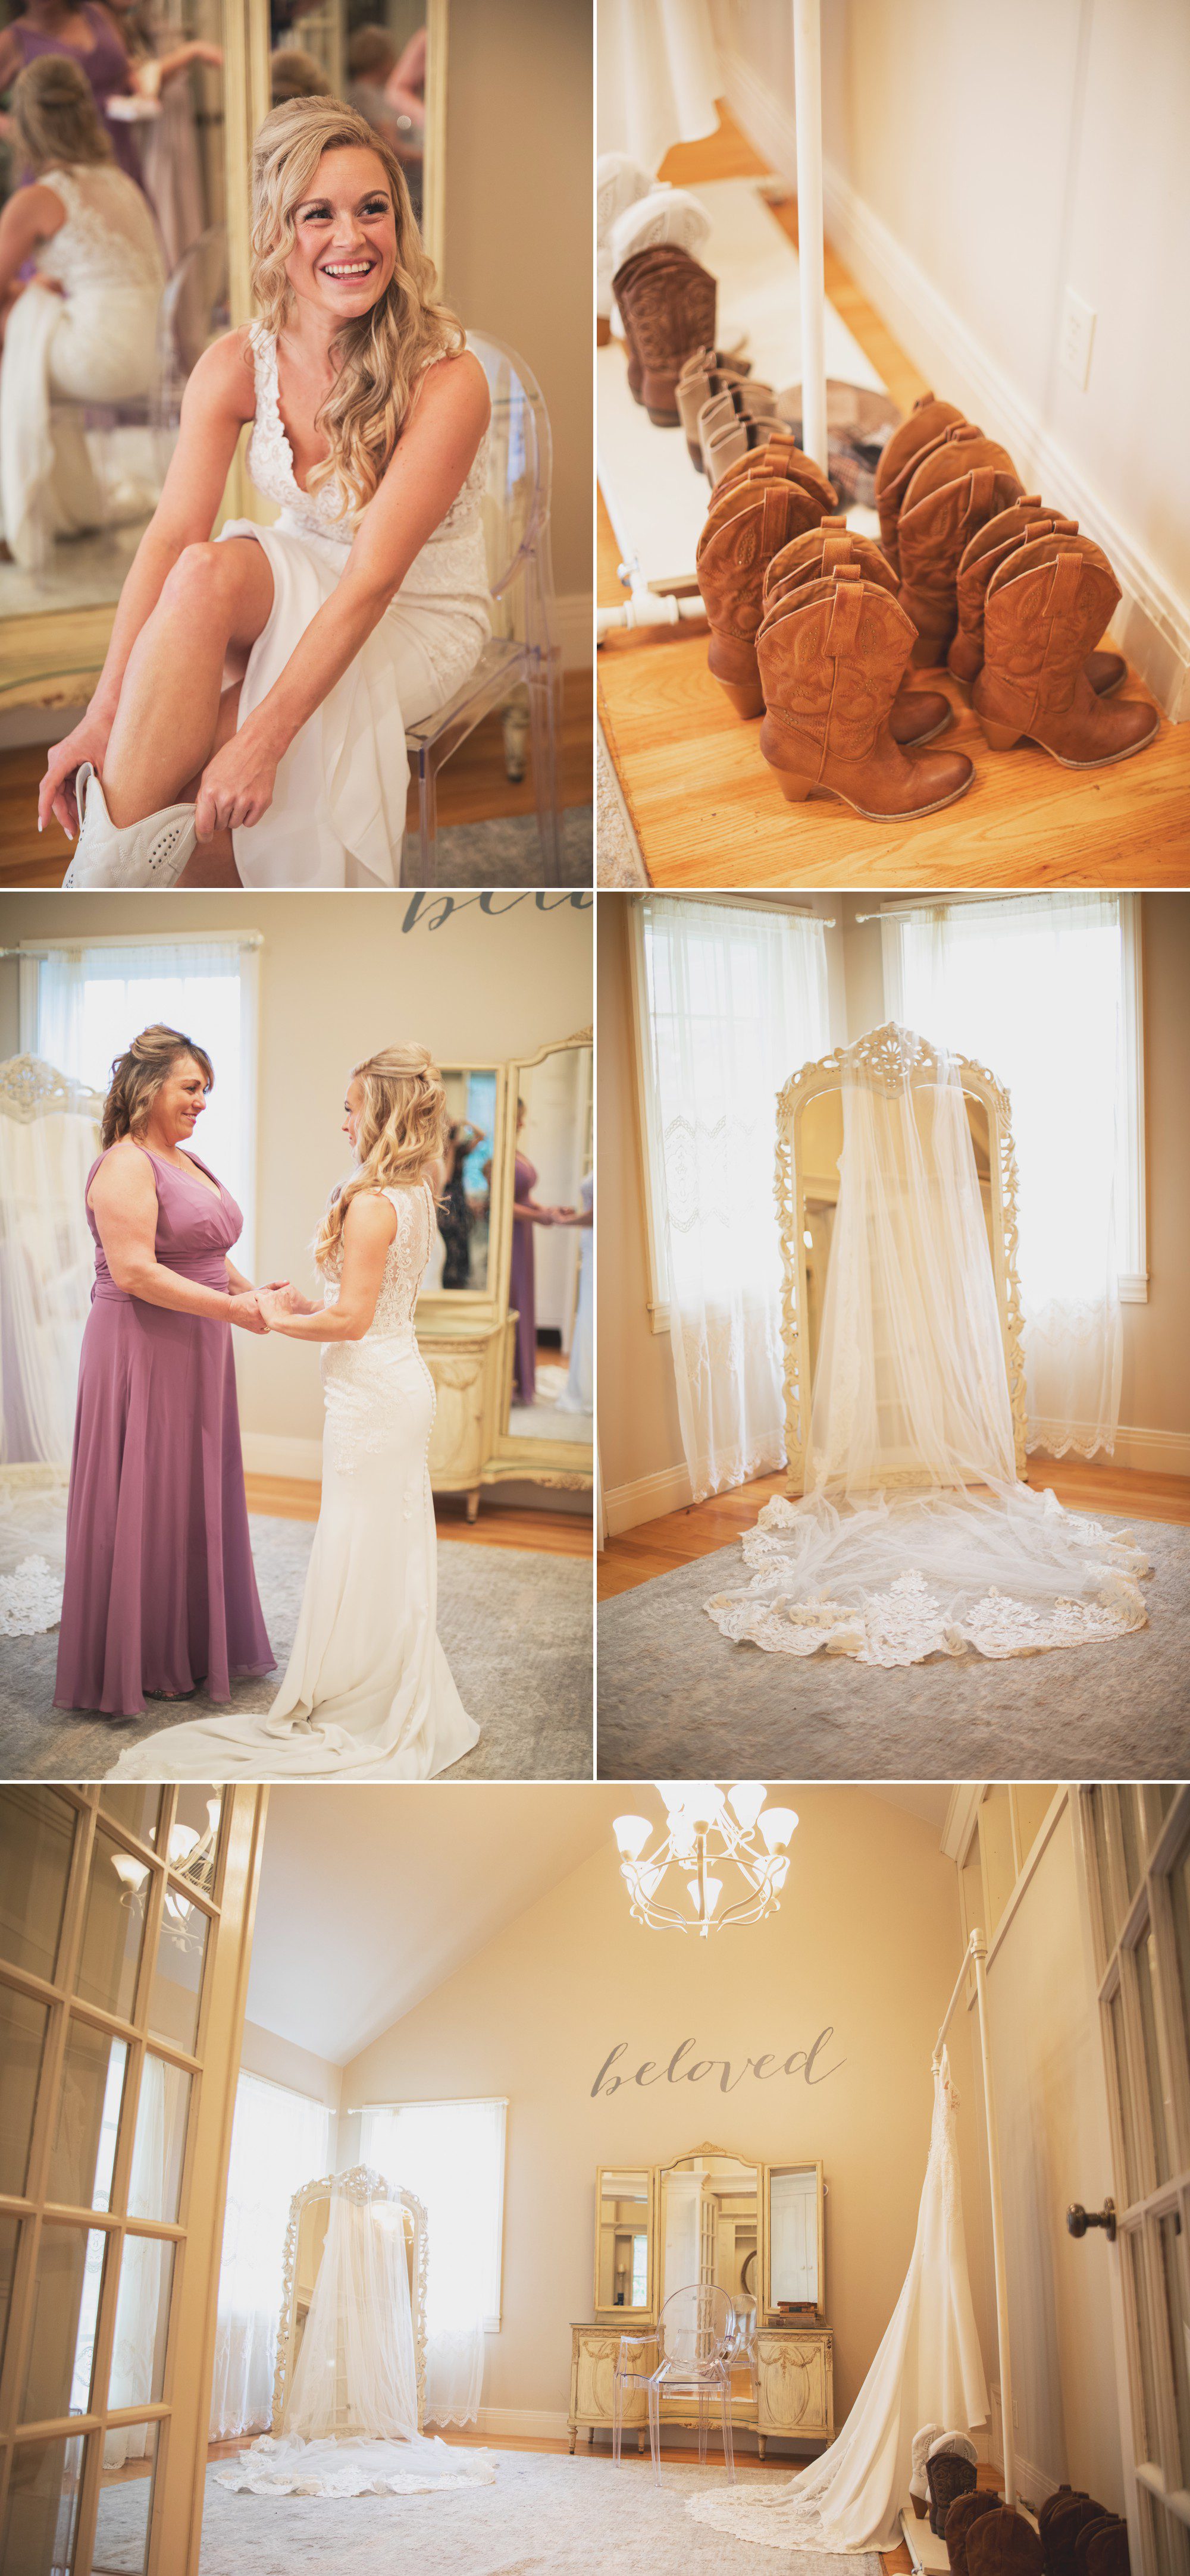 Bride gets ready in bridal suite before the wedding ceremony at Cedarwood weddings in Nashville, TN. April spring wedding, photos by Krista Lee Photography.